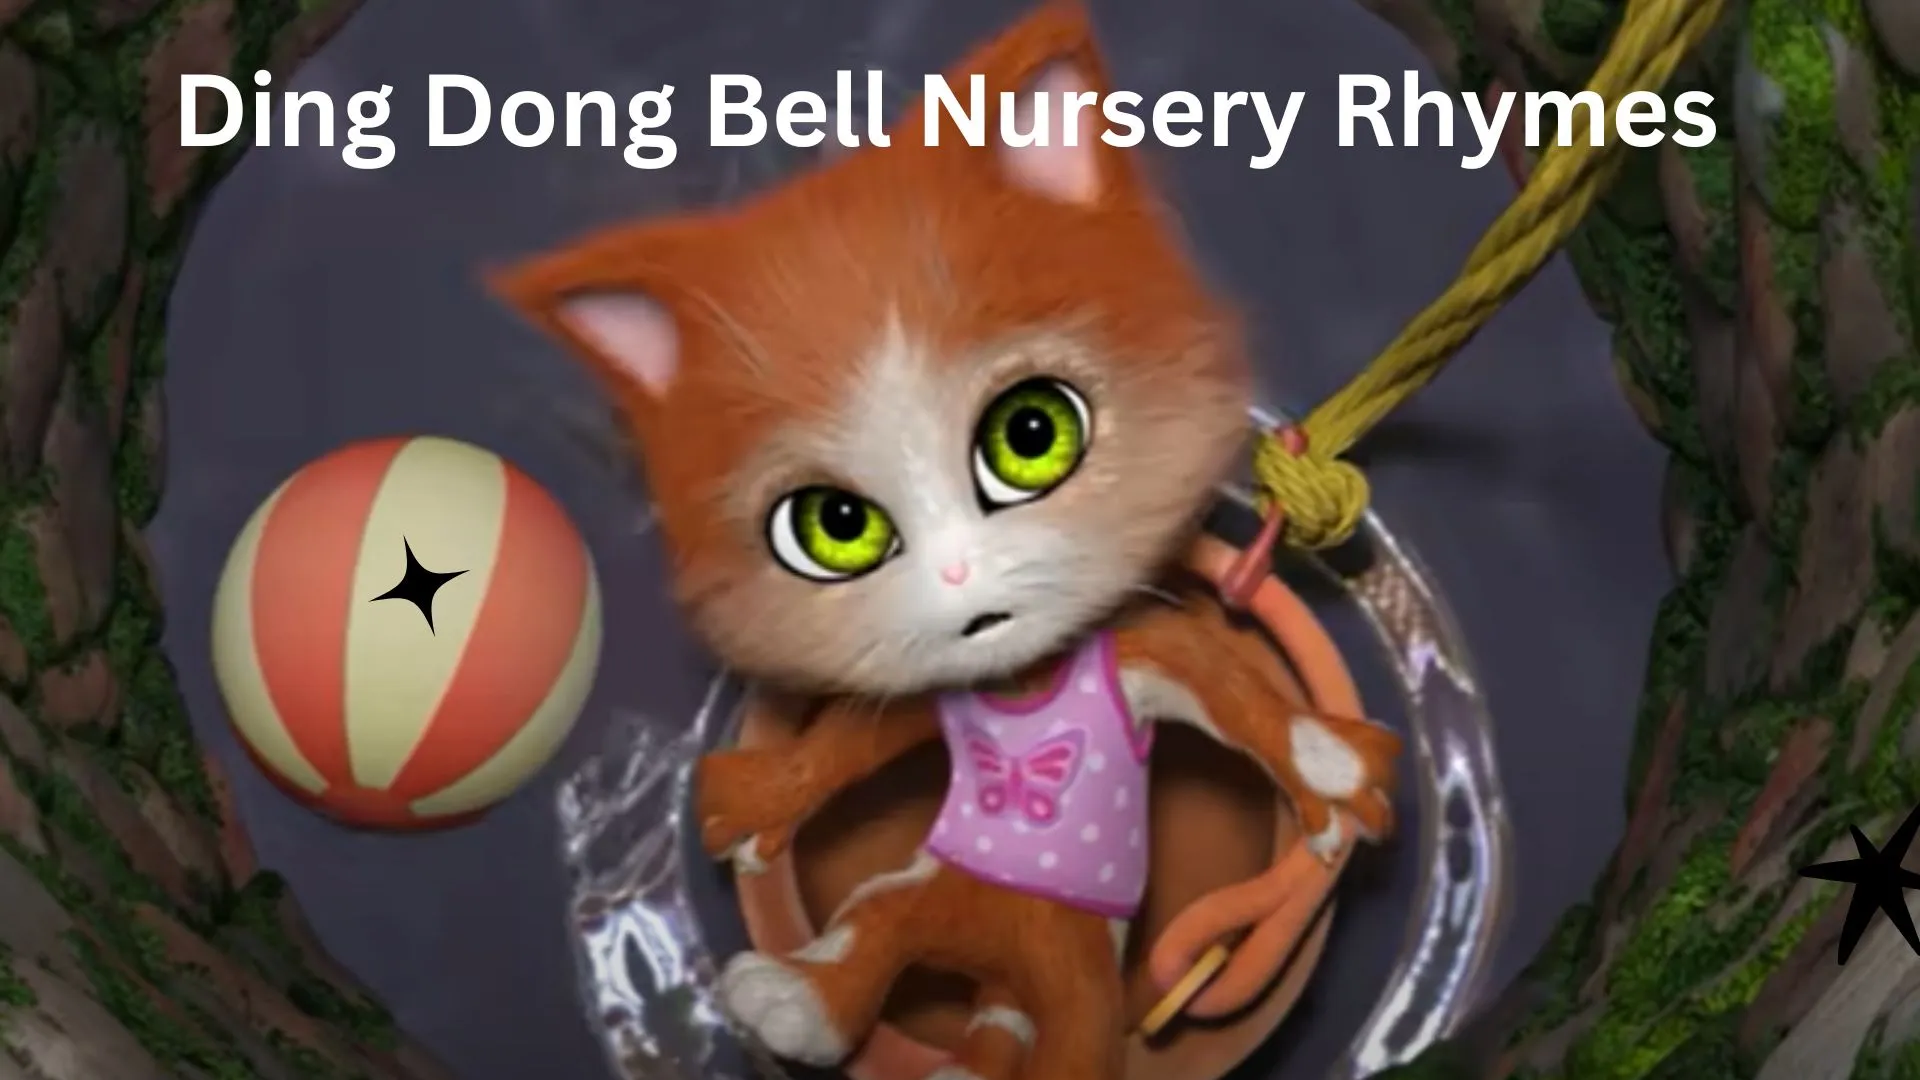 Ding Dong Bell Nursery Rhymes